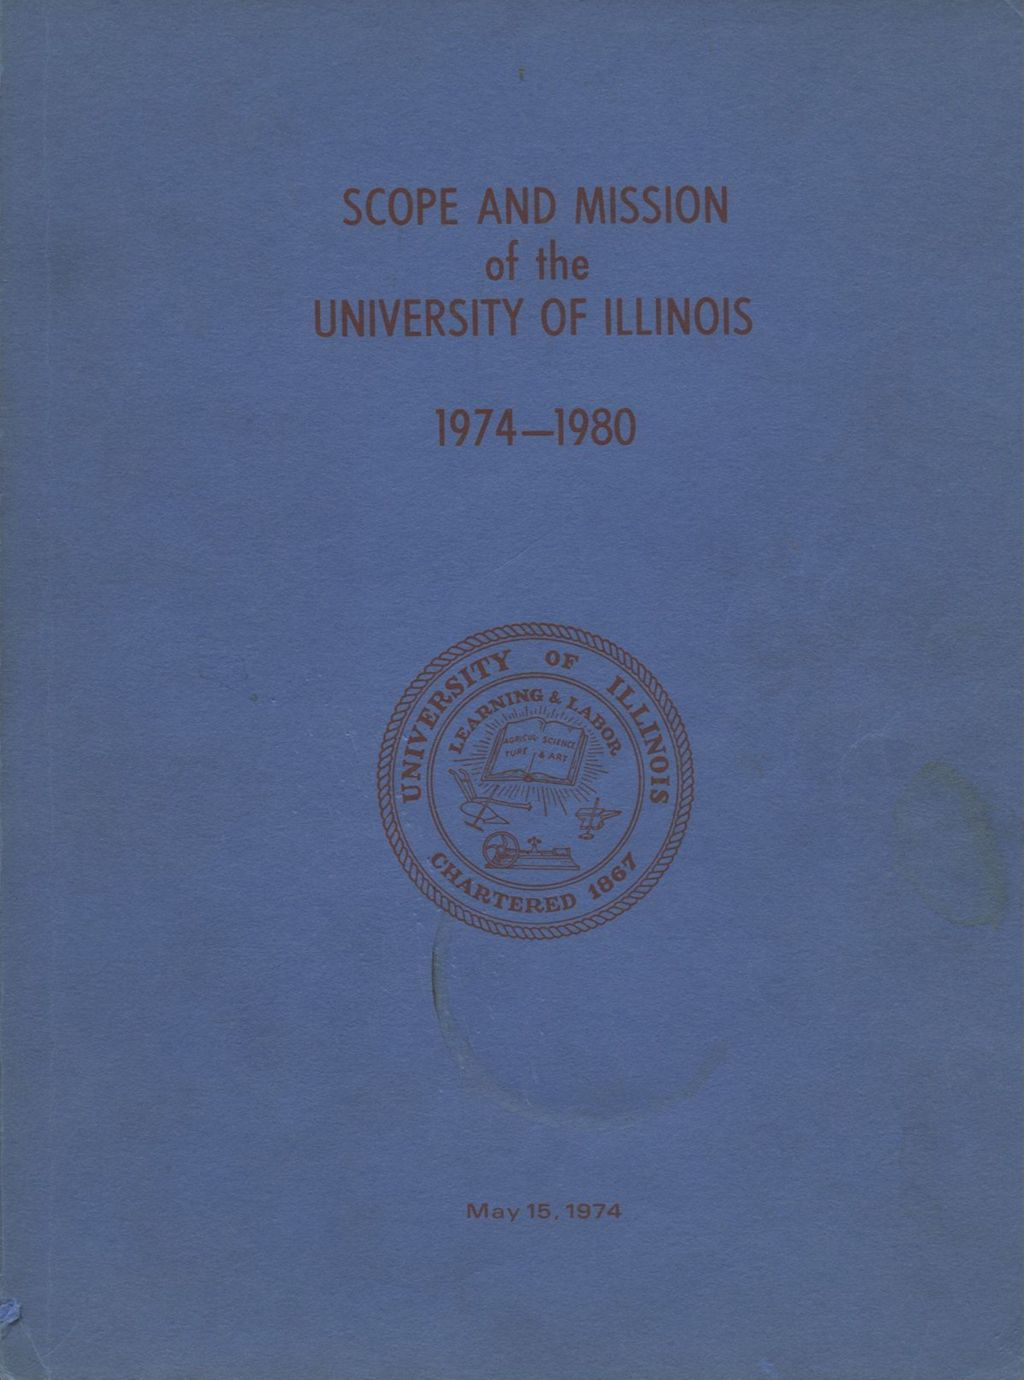 Miniature of Scope and Mission of the University of Illinois 1974-1980